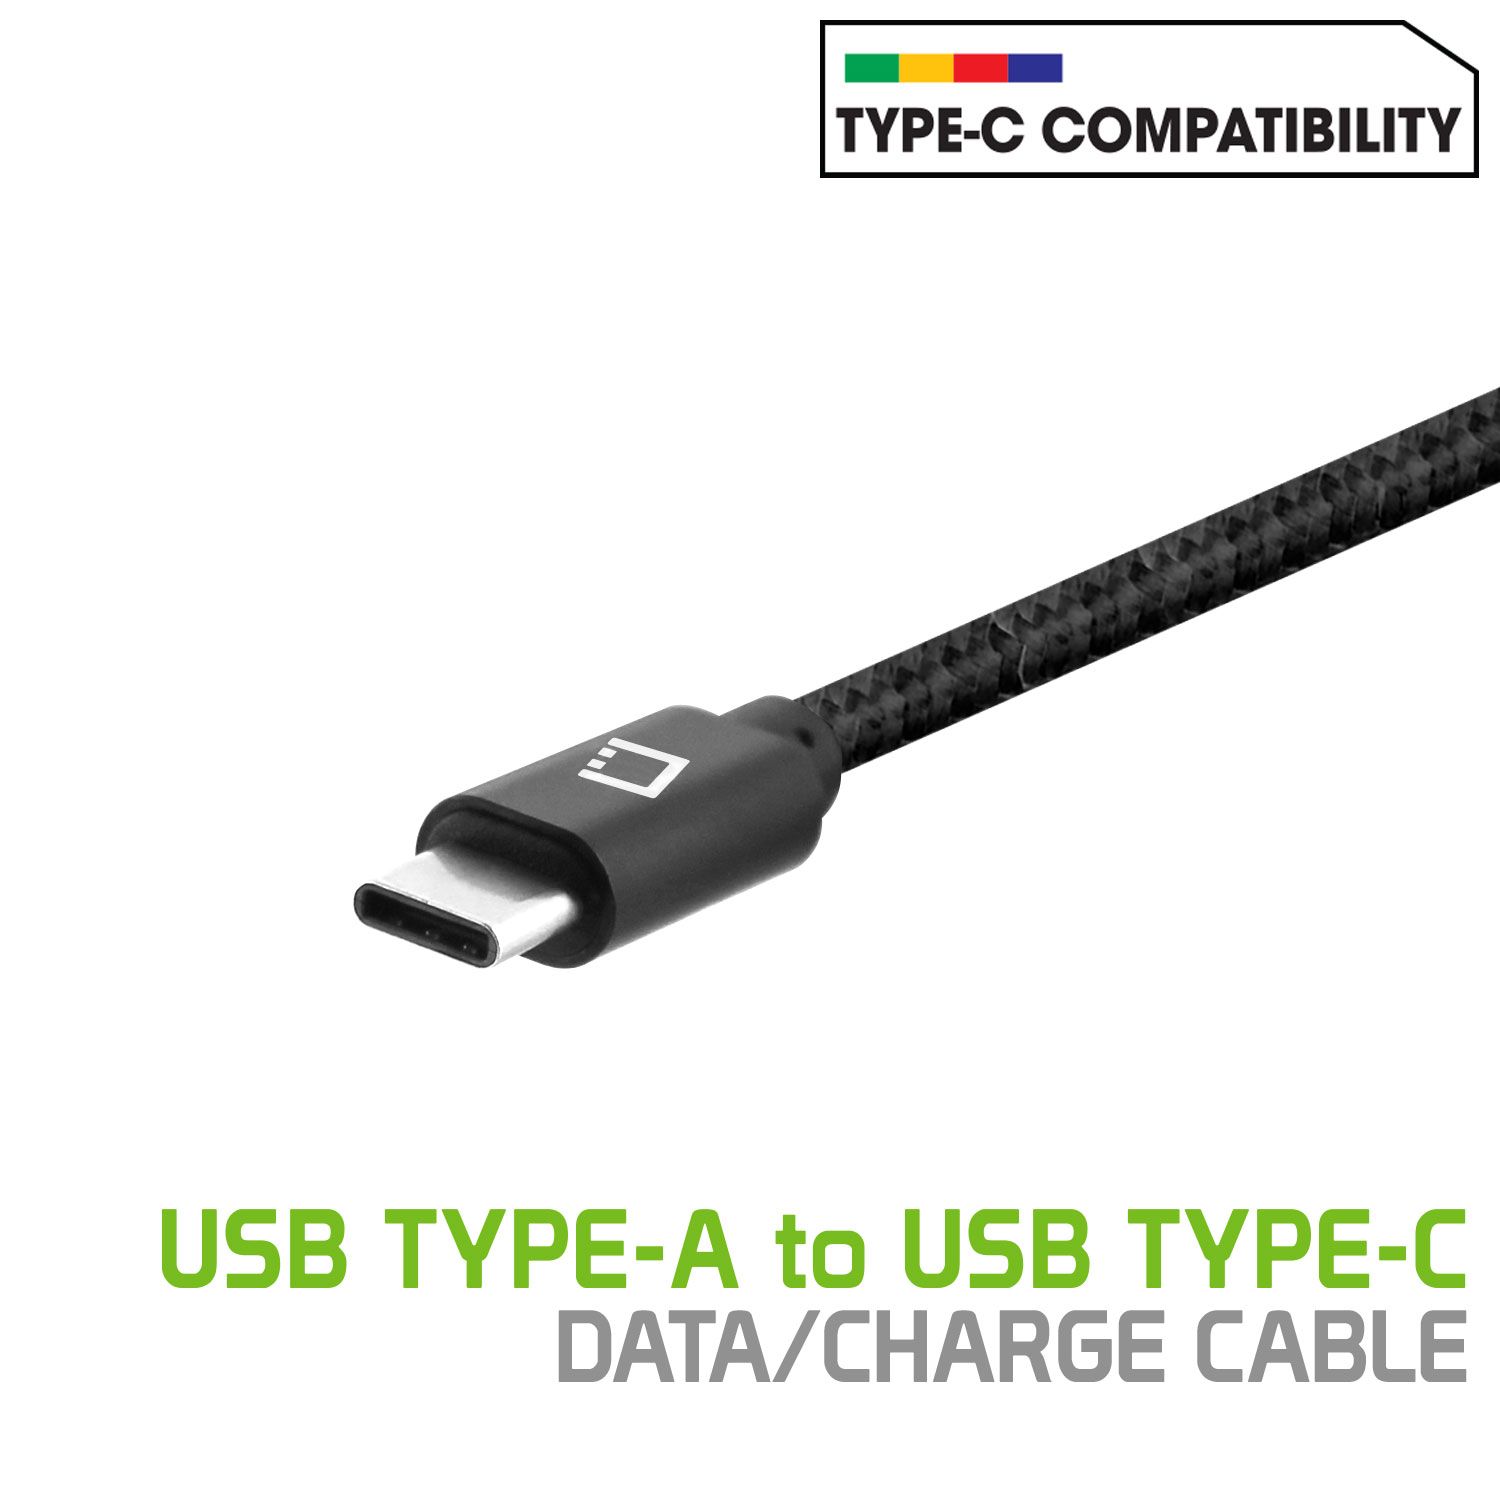 Cellet USB Cable Compatible with Nokia C5 Endi, Heavy Duty Braided USB Type C (USB-C to USB-A) Fast Charging Sync Cable (4 feet/1.2 meters) and Atom Wipe - image 2 of 8